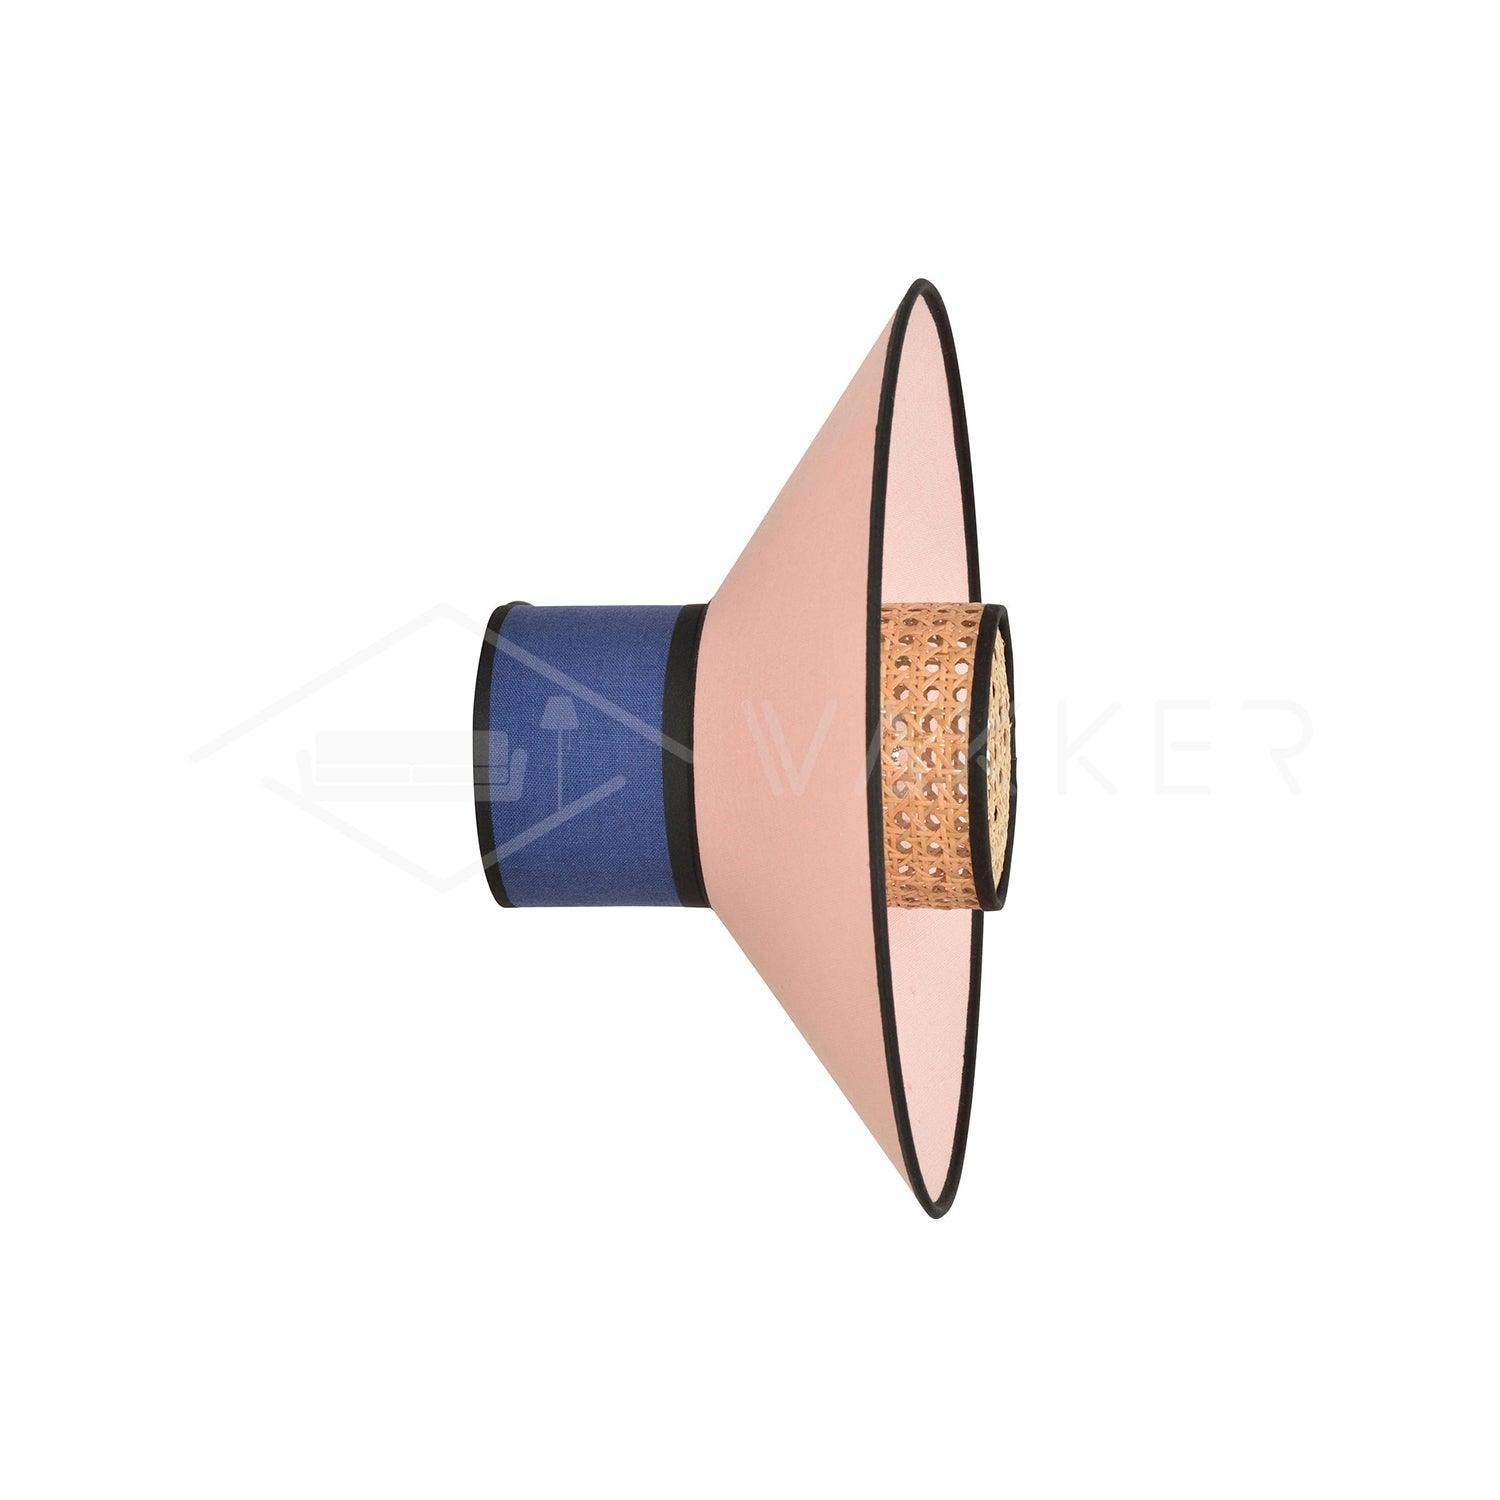 Singapour Conical Wall Light in Pink and Indigo, Diameter 40cm x Height 22cm (Set of 2)